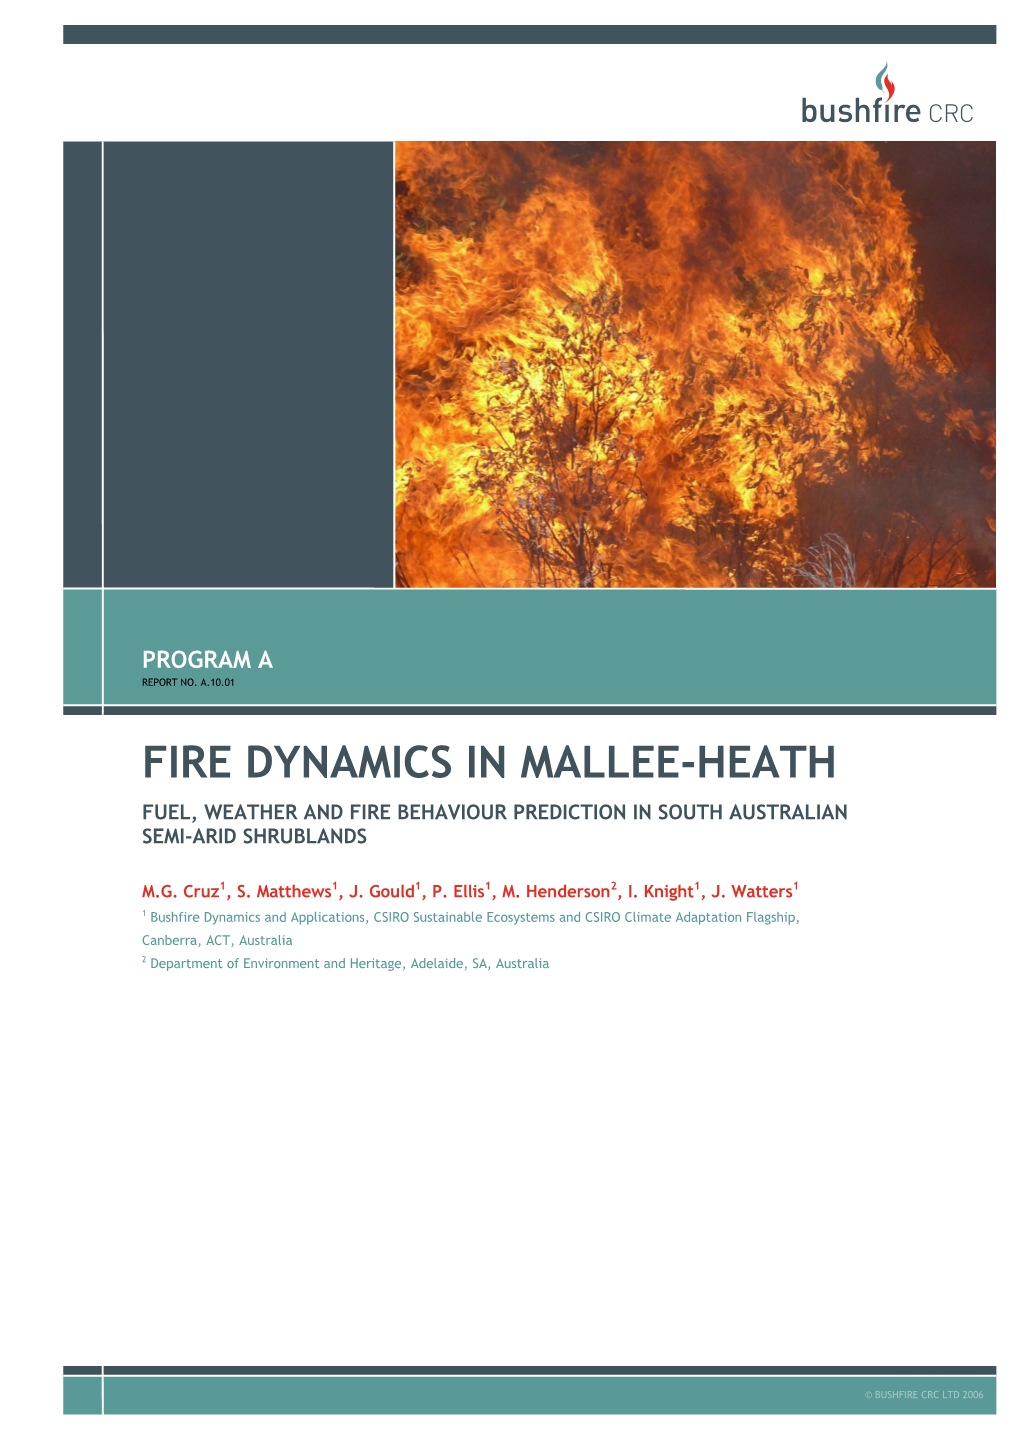 Fire Dynamics in Mallee-Heath Fuel, Weather and Fire Behaviour Prediction in South Australian Semi-Arid Shrublands